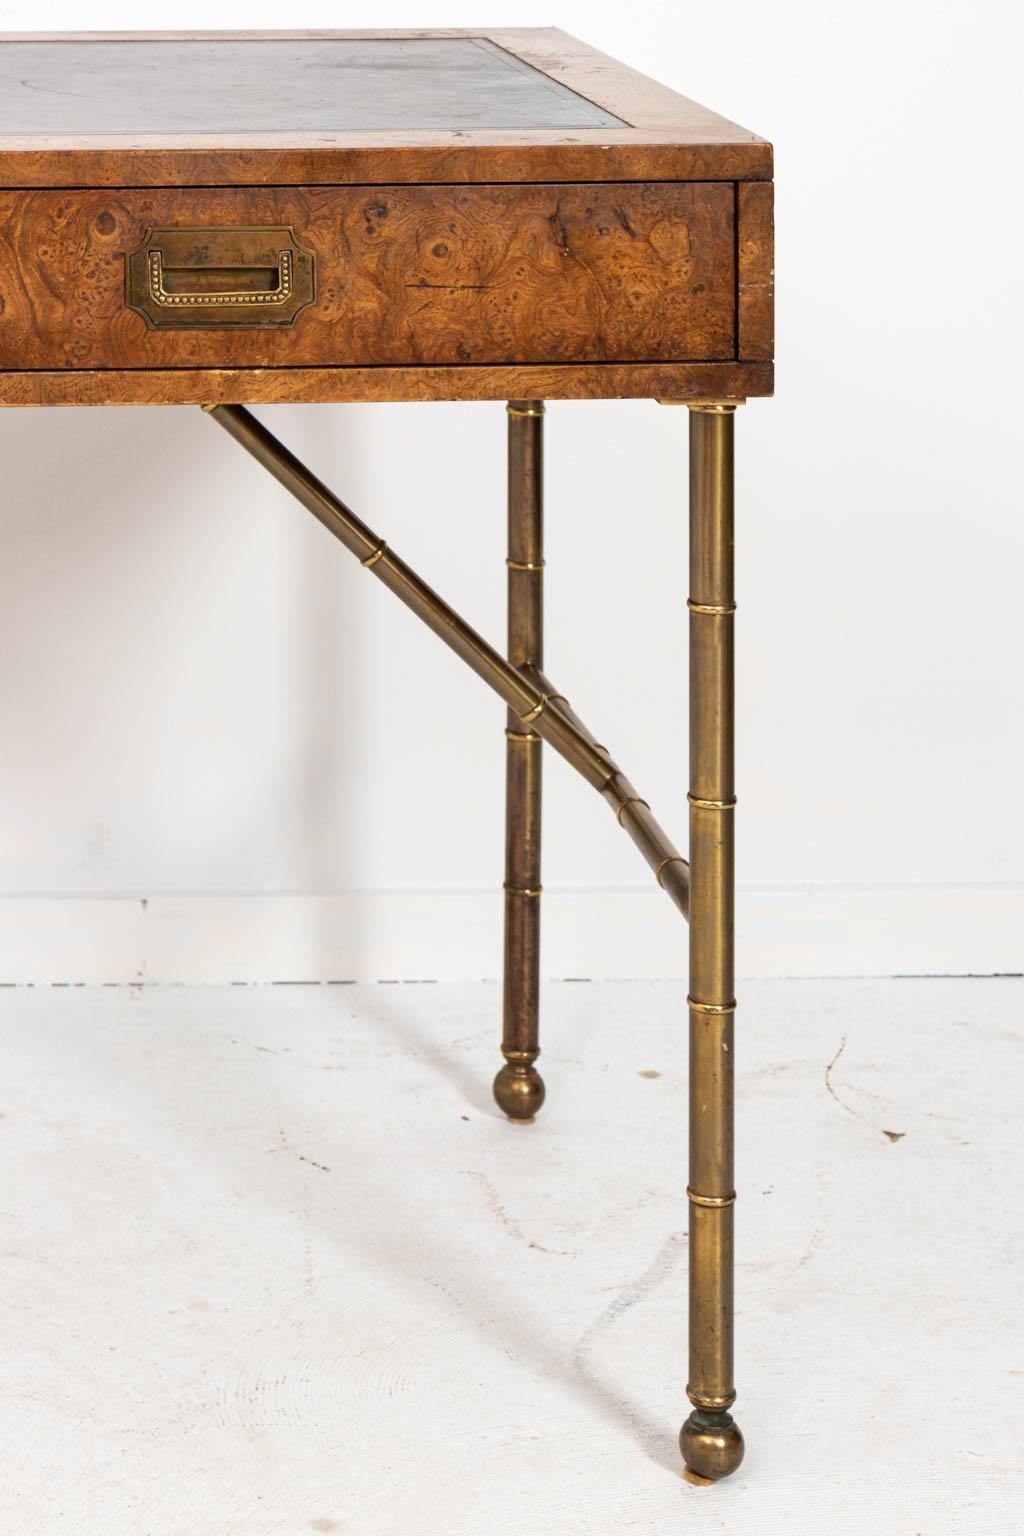 Brass Midcentury Burlwood Desk with Leather Top by Mastercraft 